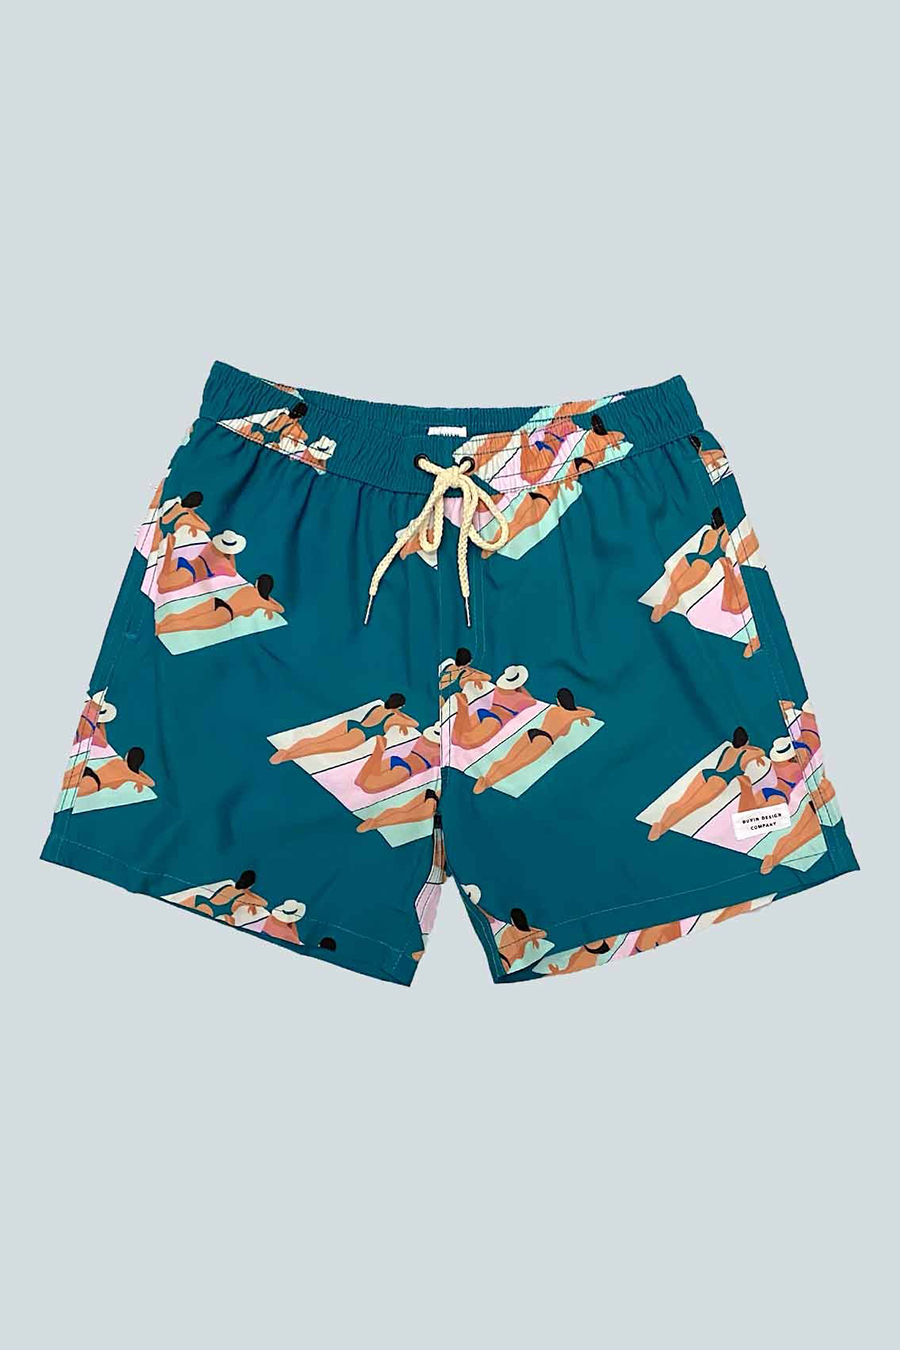 Tanning Co Short | Teal - West of Camden - Main Image Number 1 of 2